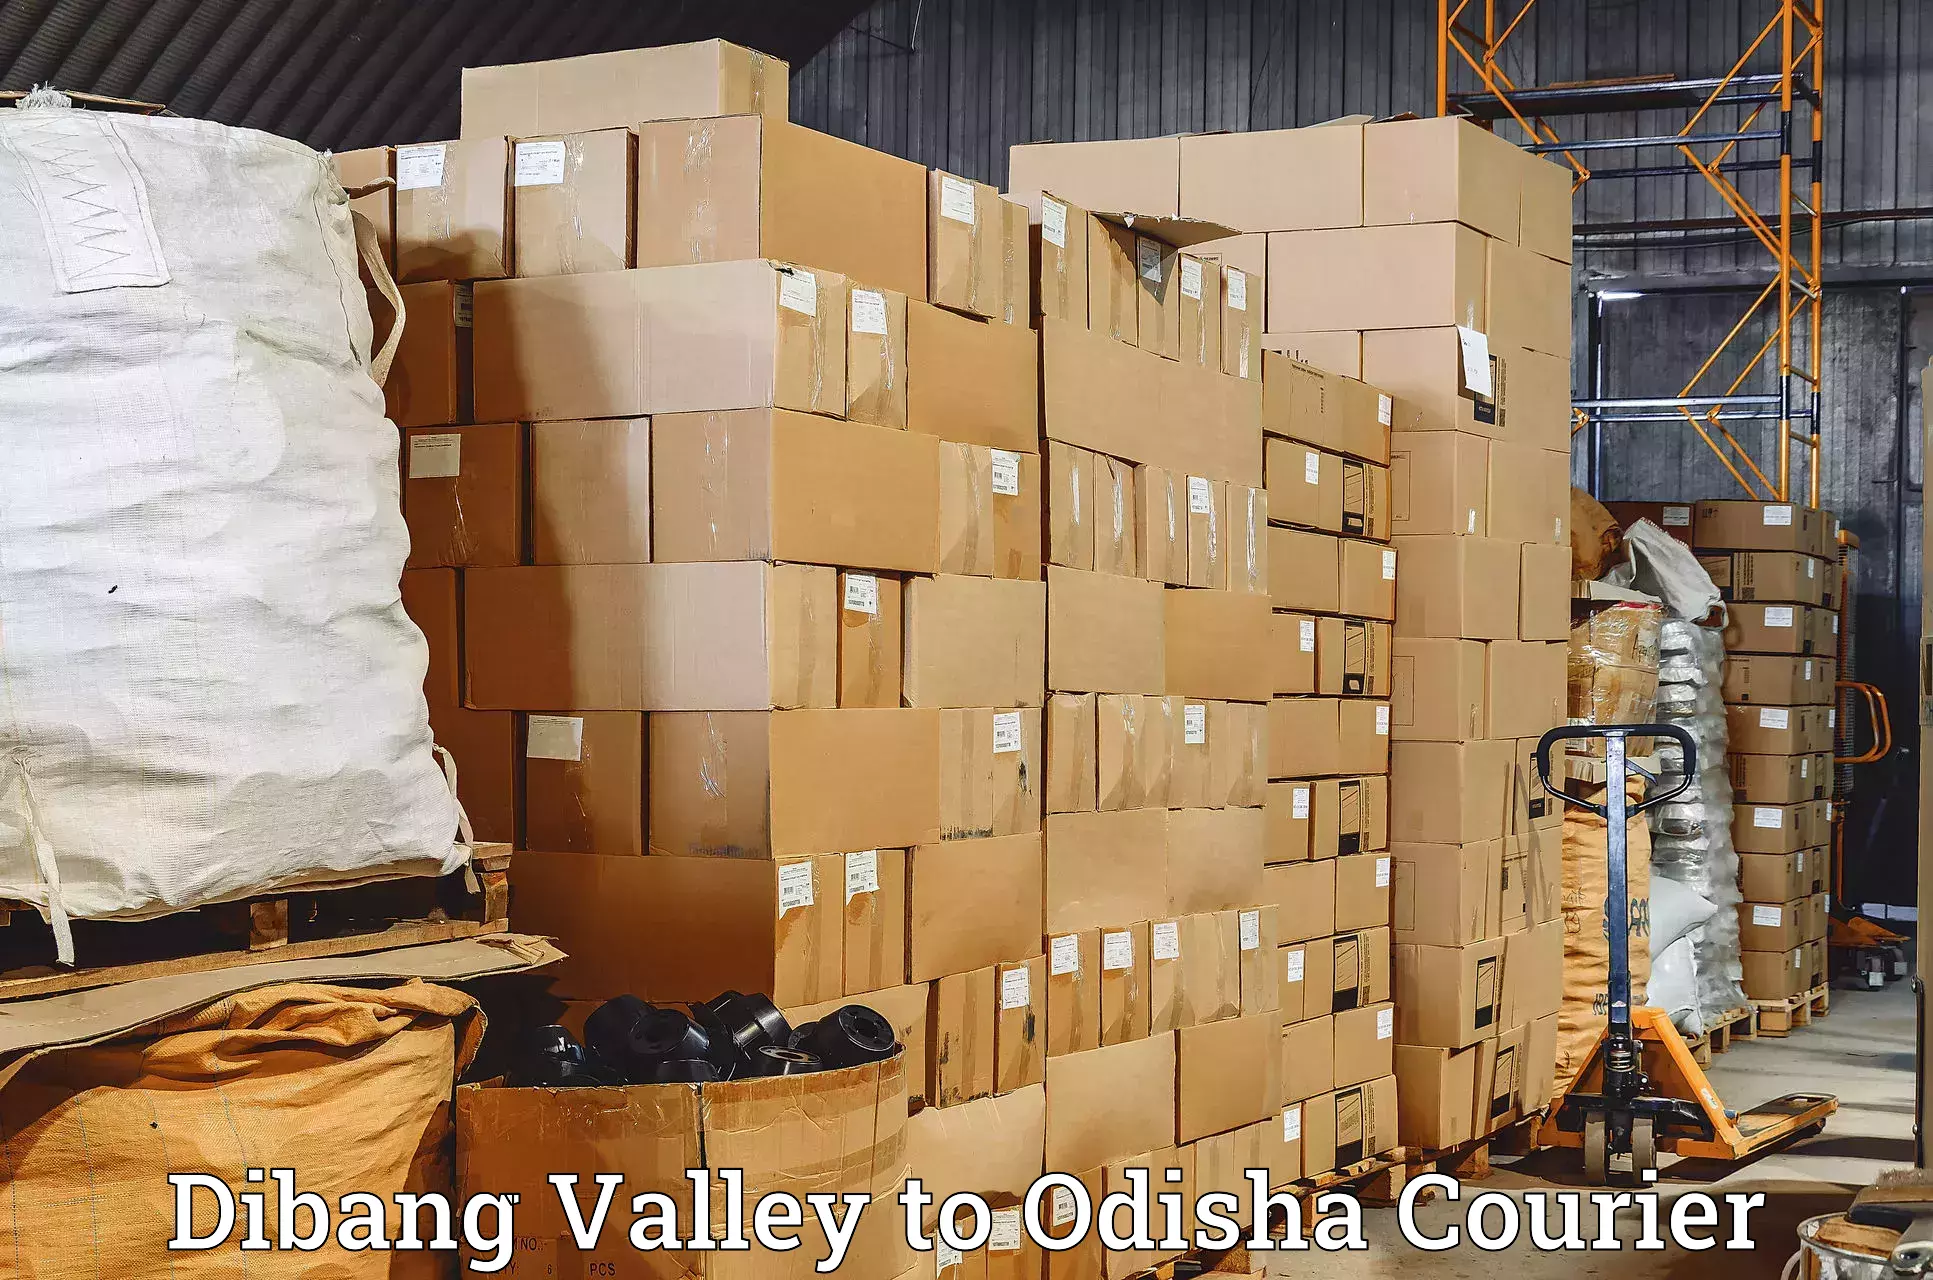 Courier service comparison Dibang Valley to Kuchinda